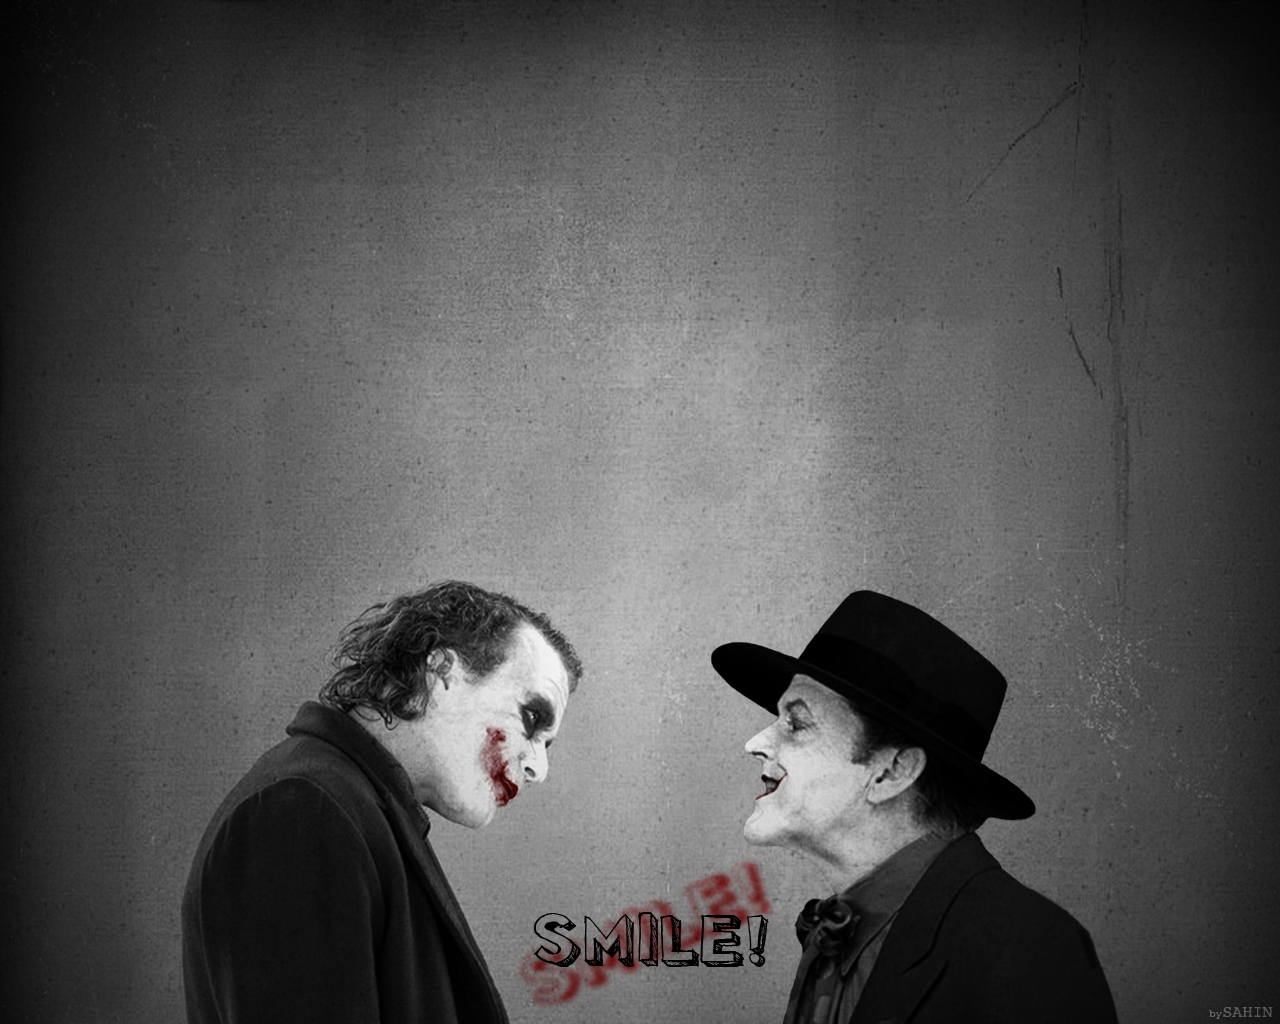 The Dark Knight Files: why so serious wallpaper 2012 series